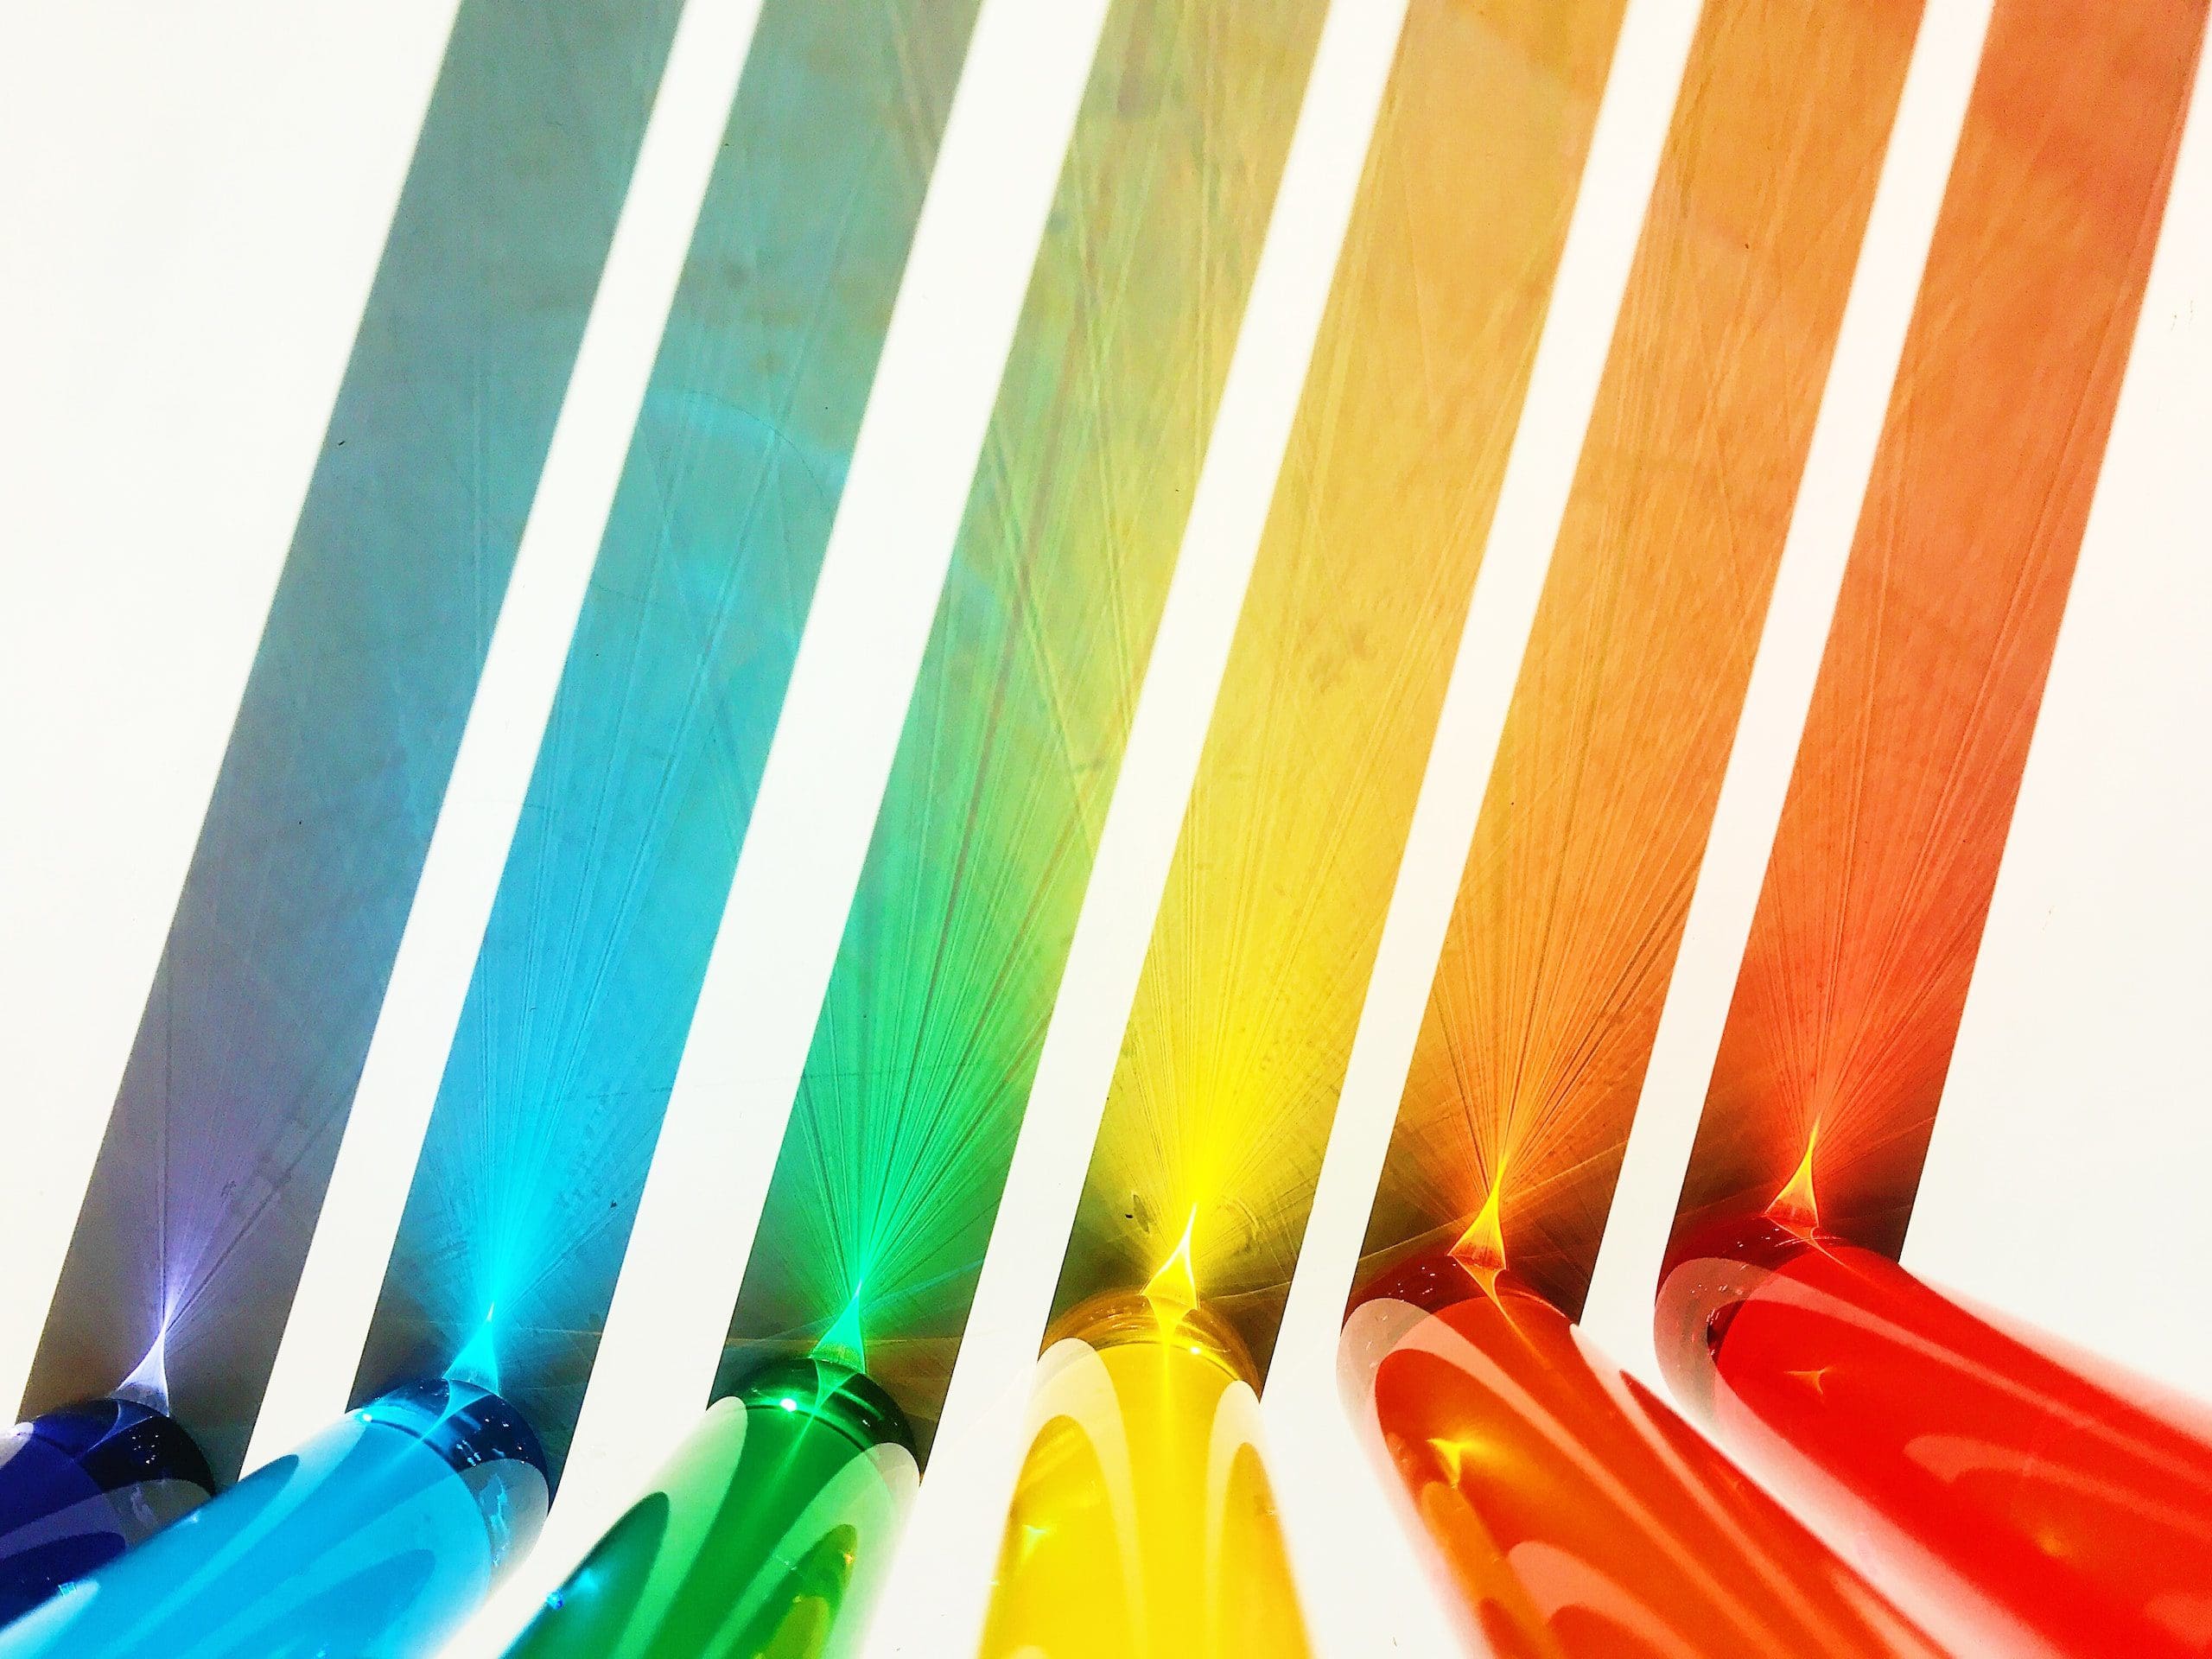 From left to right - 6 coloured semi translucent rods being lit from behind, the rods are navy, light blue, green, yellow, orange and red and the effect of being lit from behind is creating colourful shadows.